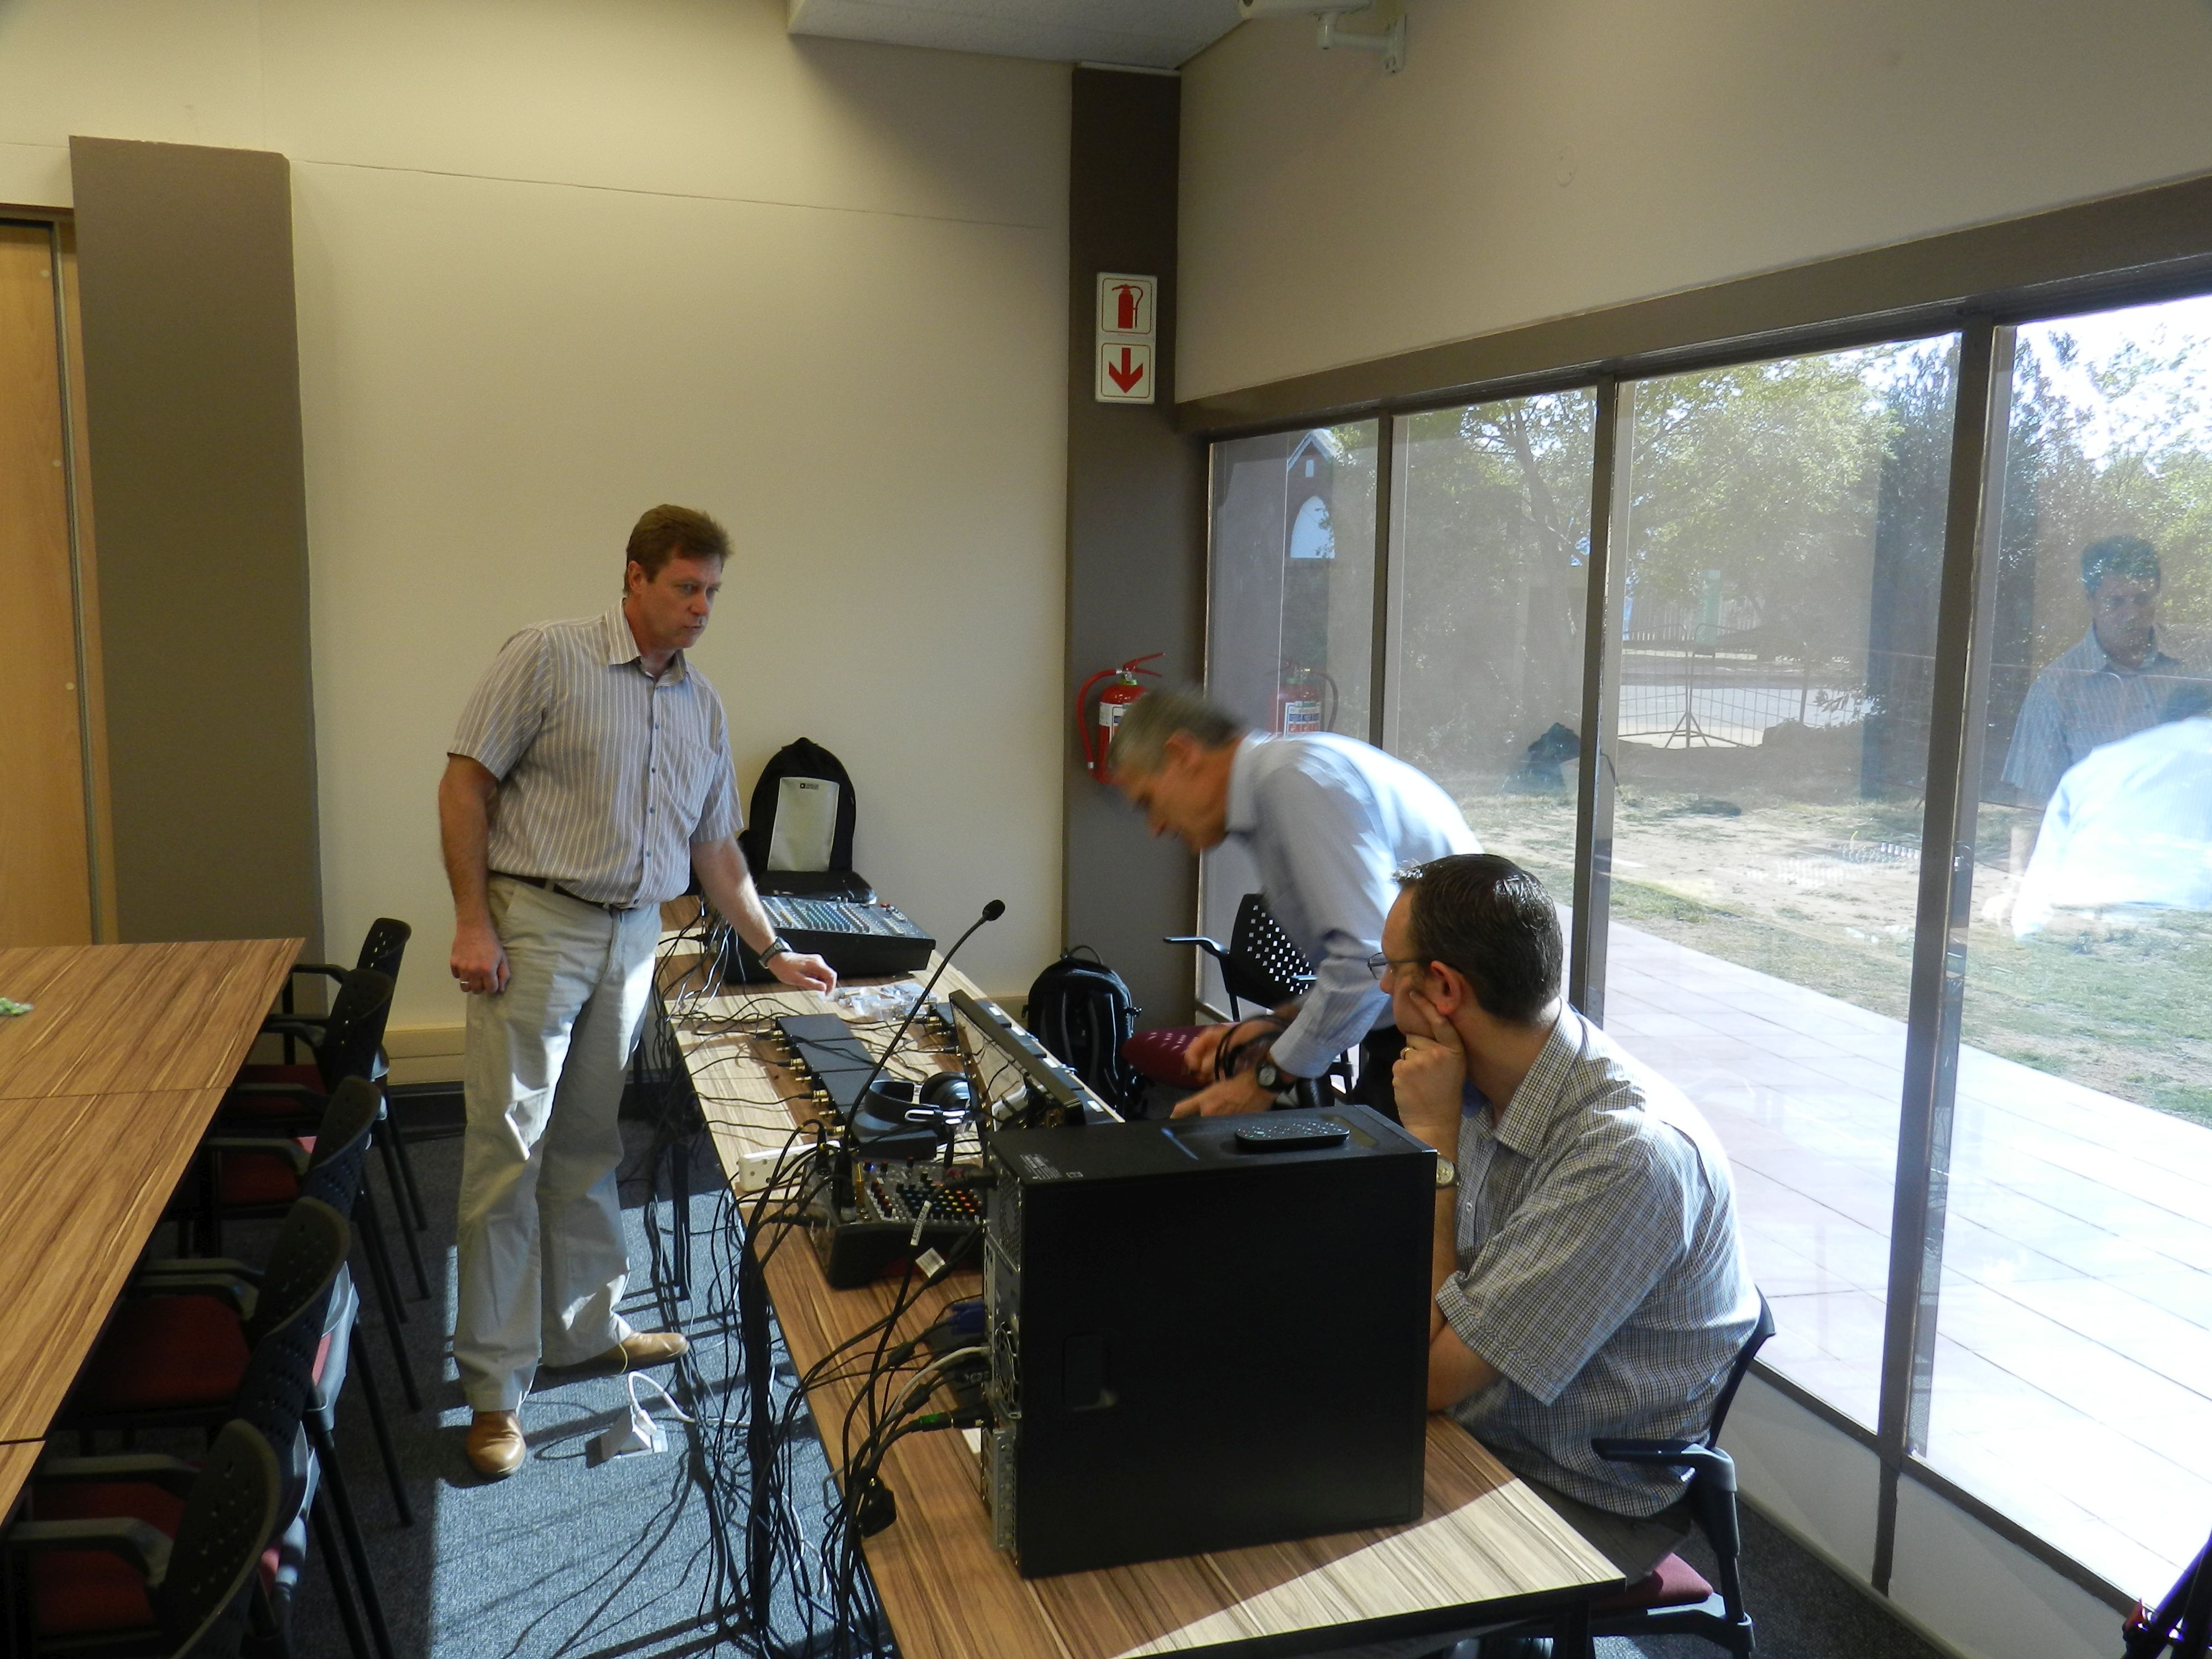 The NWU IT team setting up the live stream